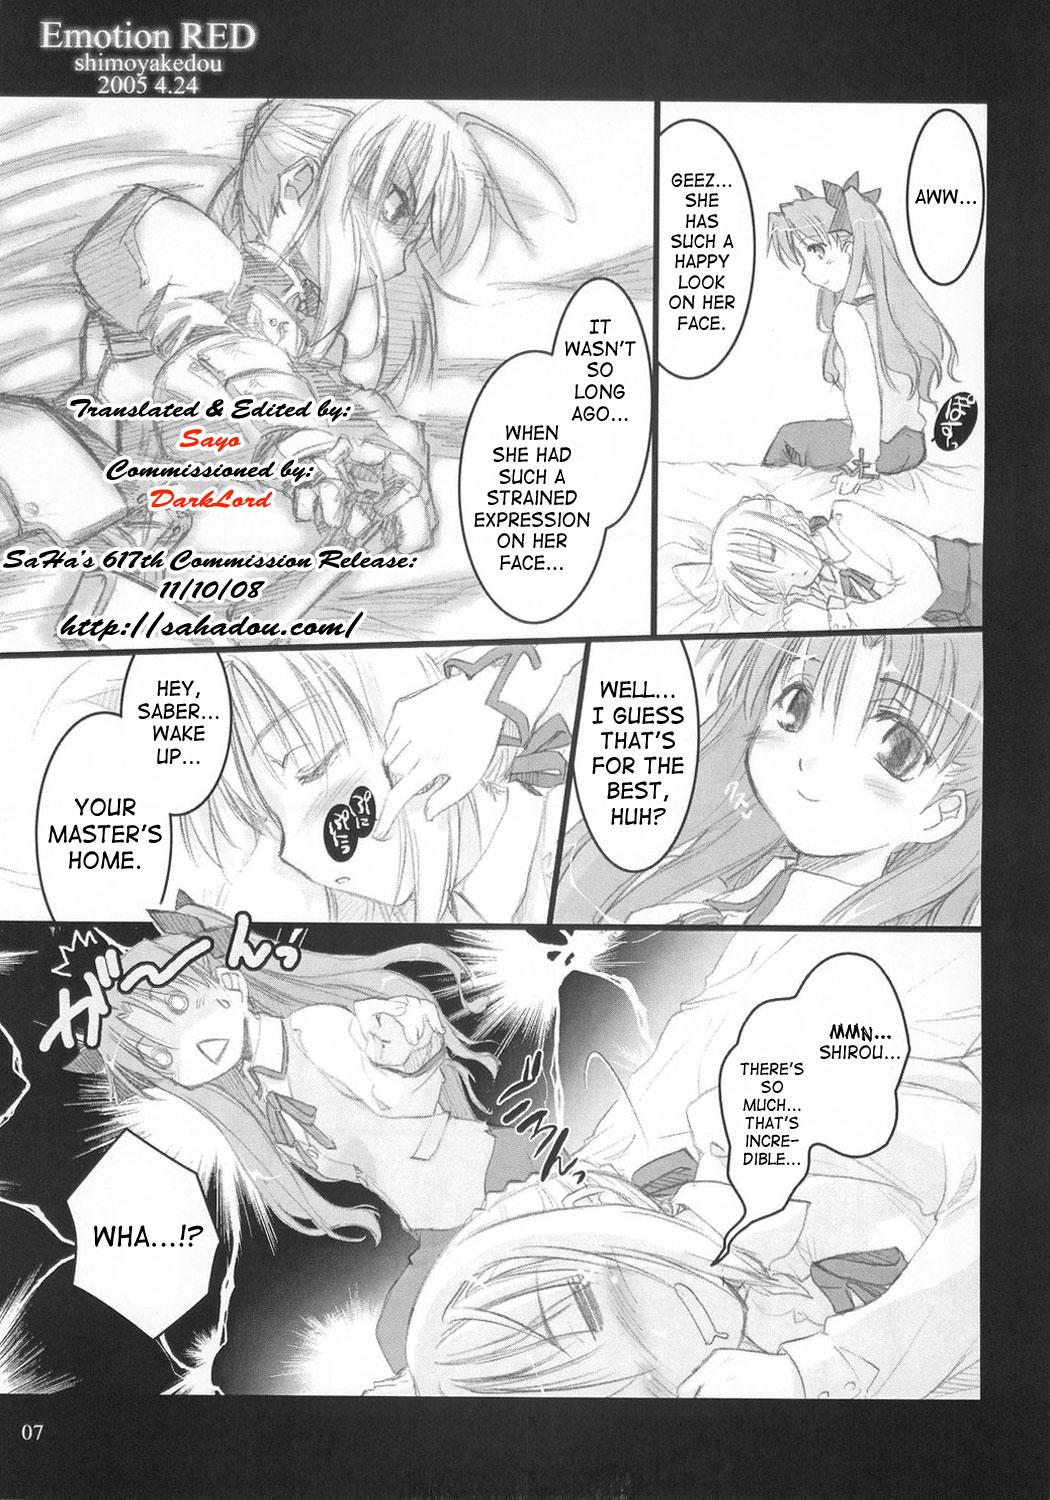 Tats Emotion RED - Fate stay night Amateur - Page 6